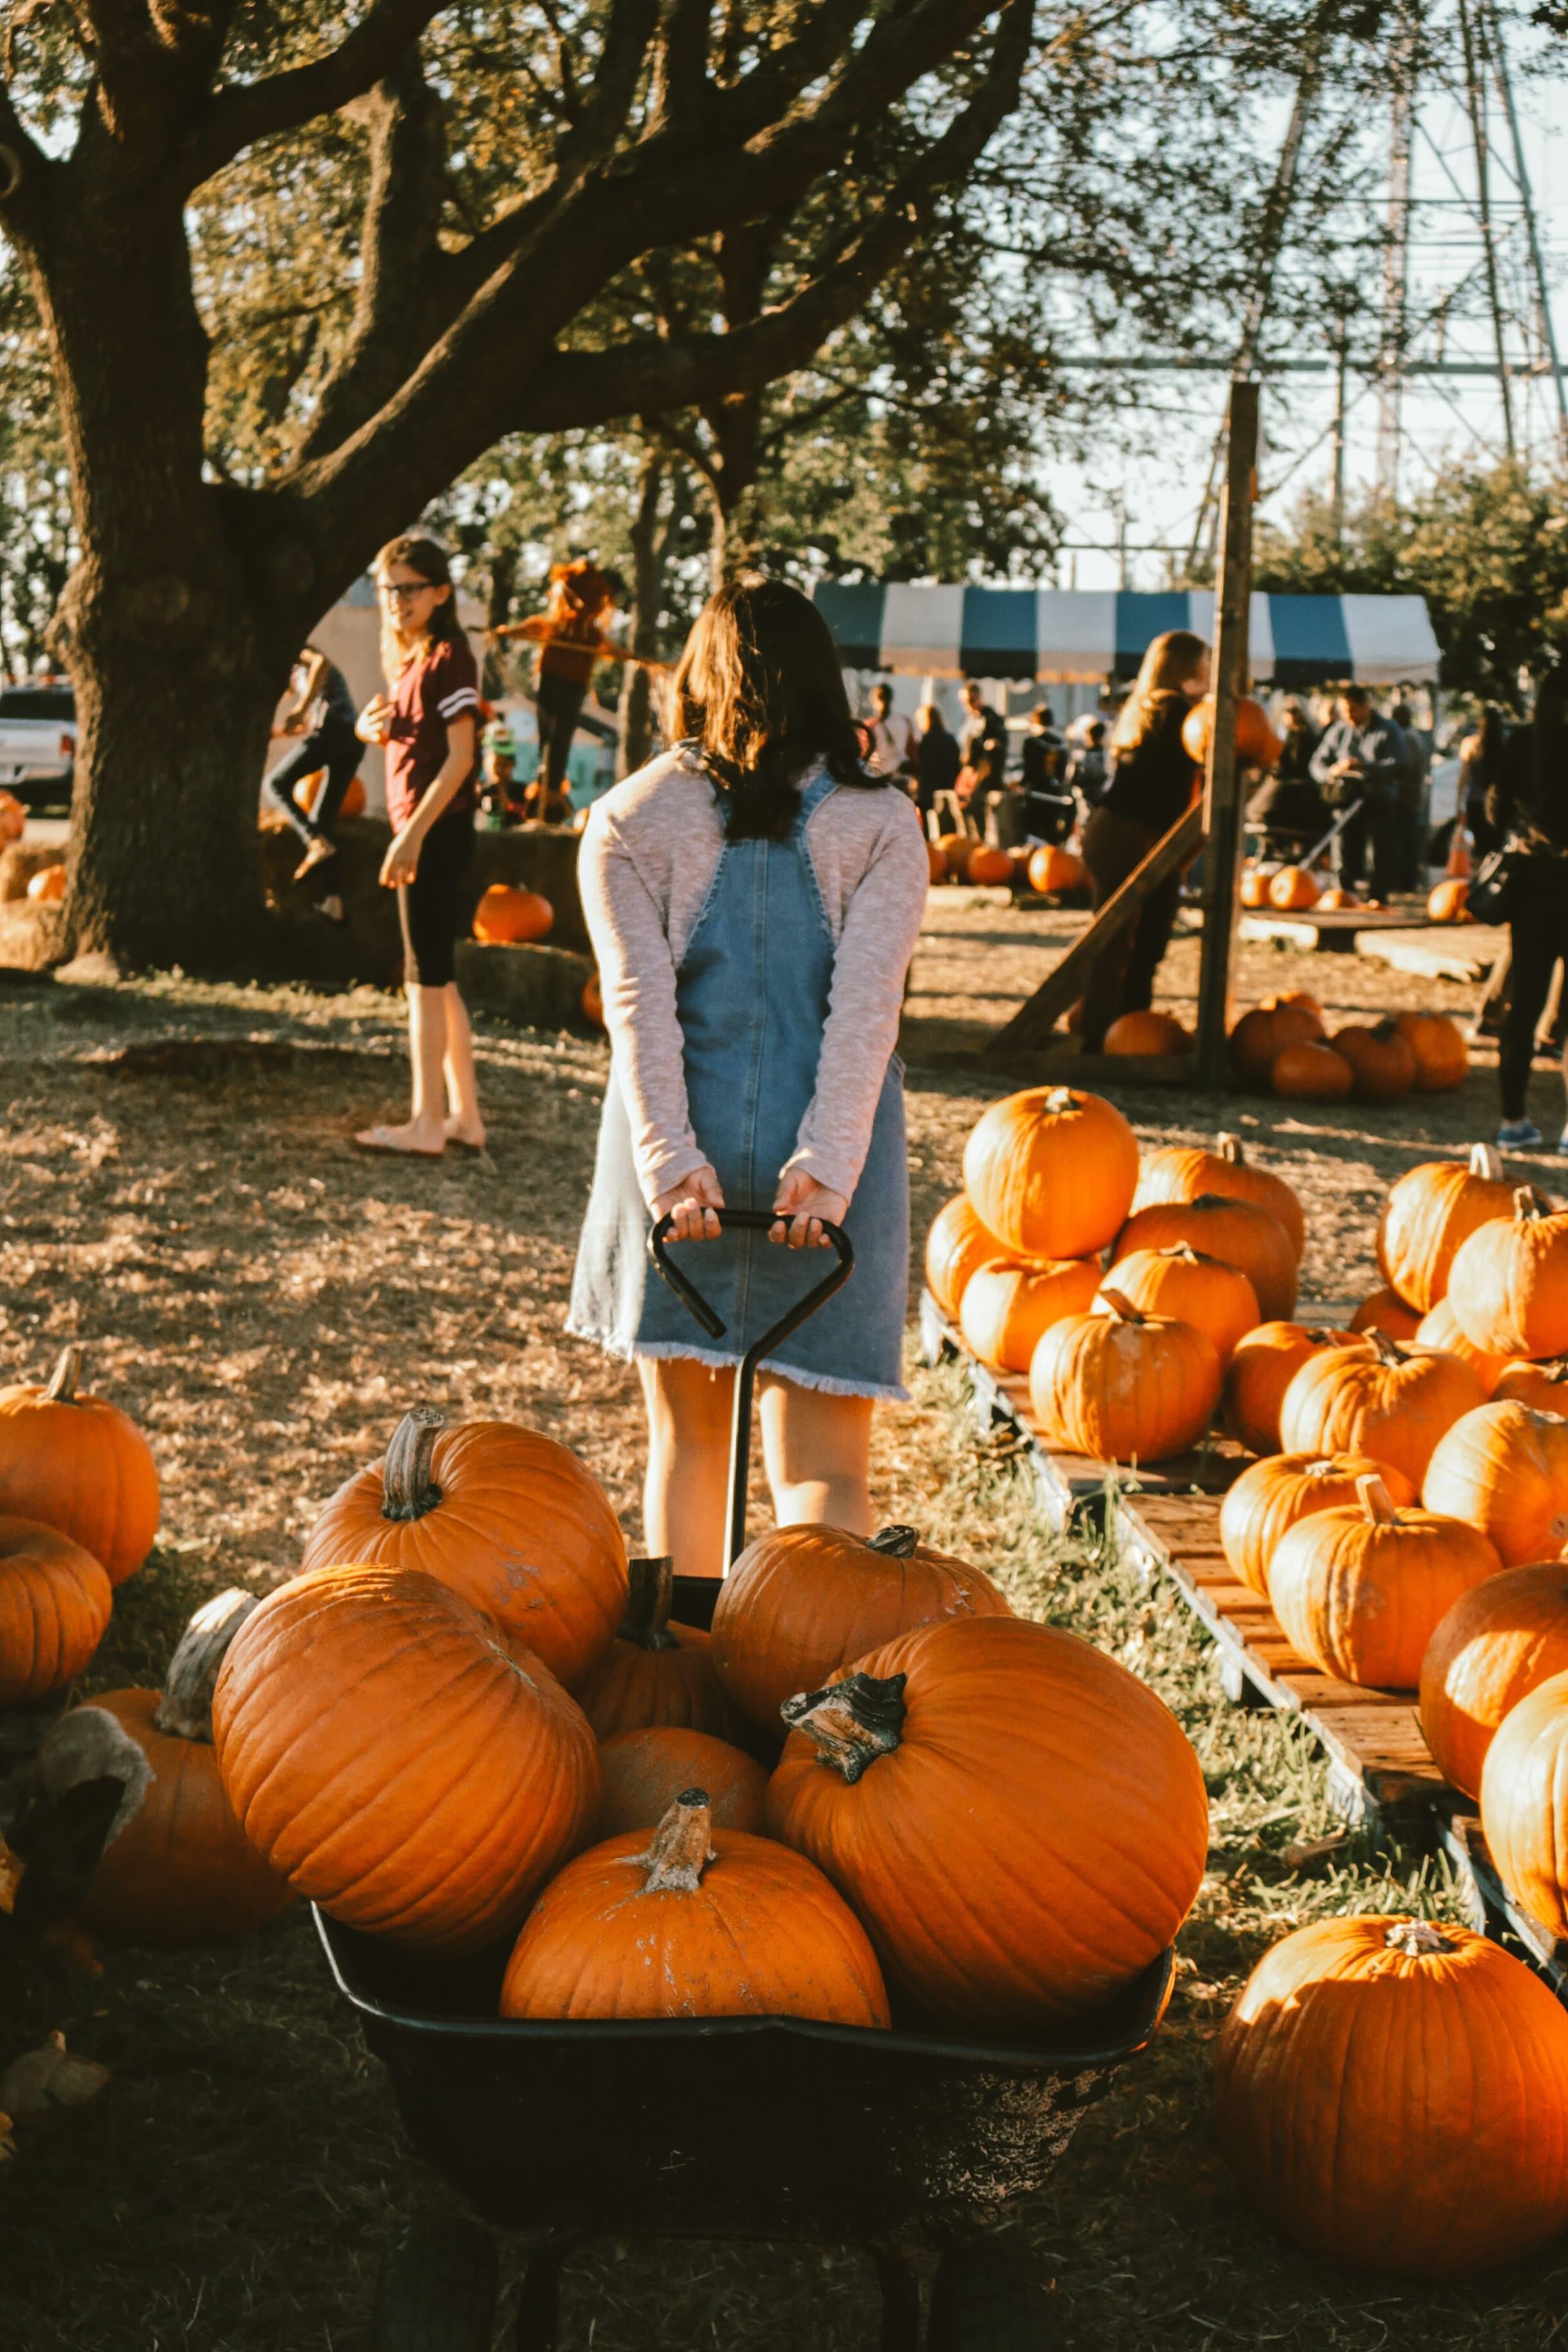 A young girl pulling a wagon full of pumpkins at a fall festival